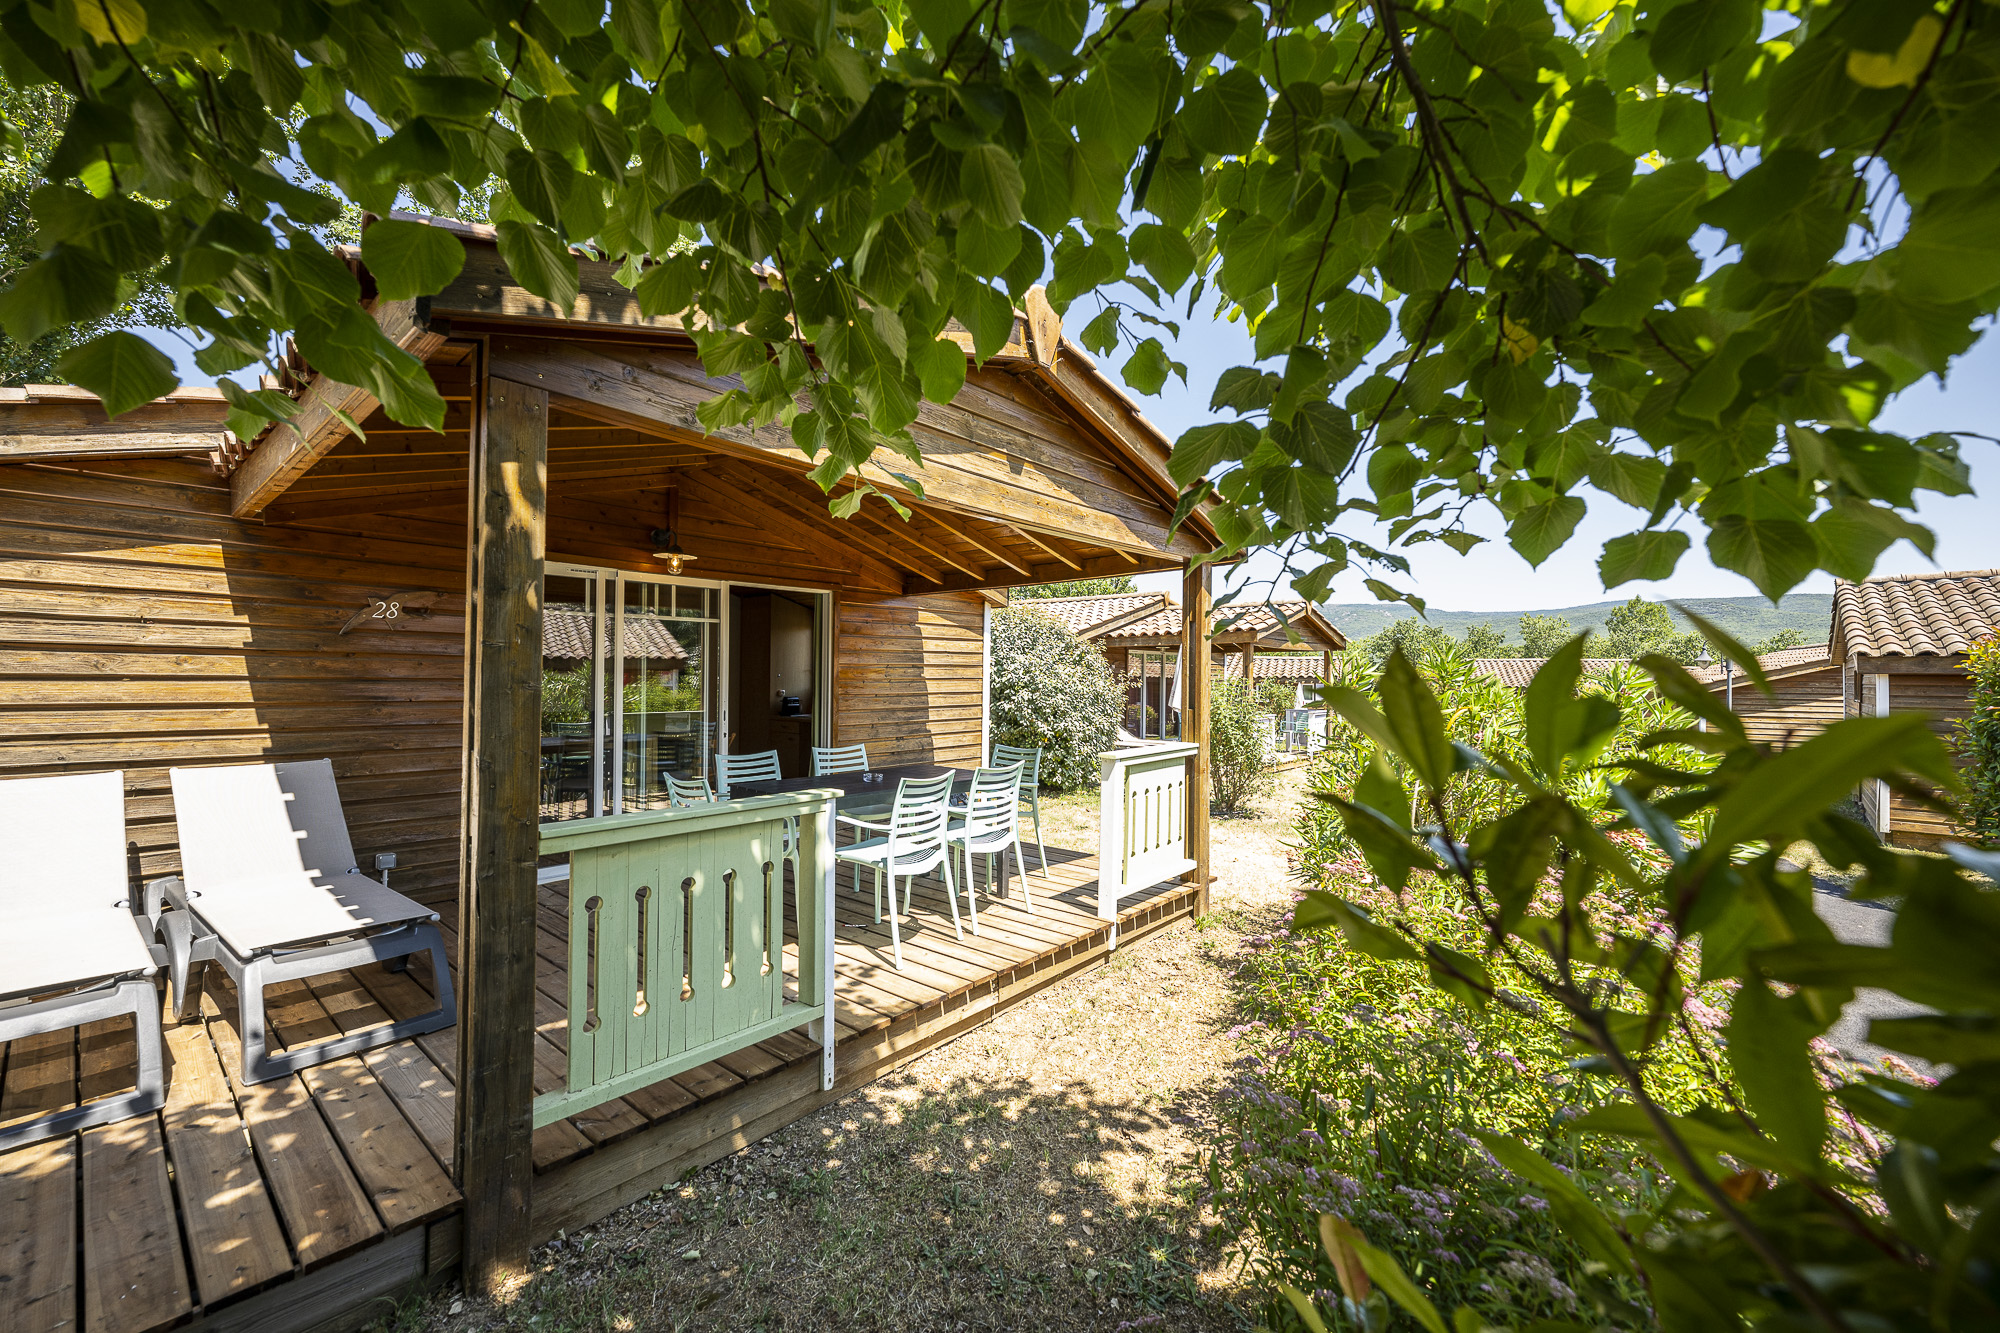 Accommodation - Chalet - 3 Bedrooms - 1 Bathroom - Chêne Vert Pmr (Adapted To The People With Reduced Mobility) - Castel Domaine de Sévenier & Spa